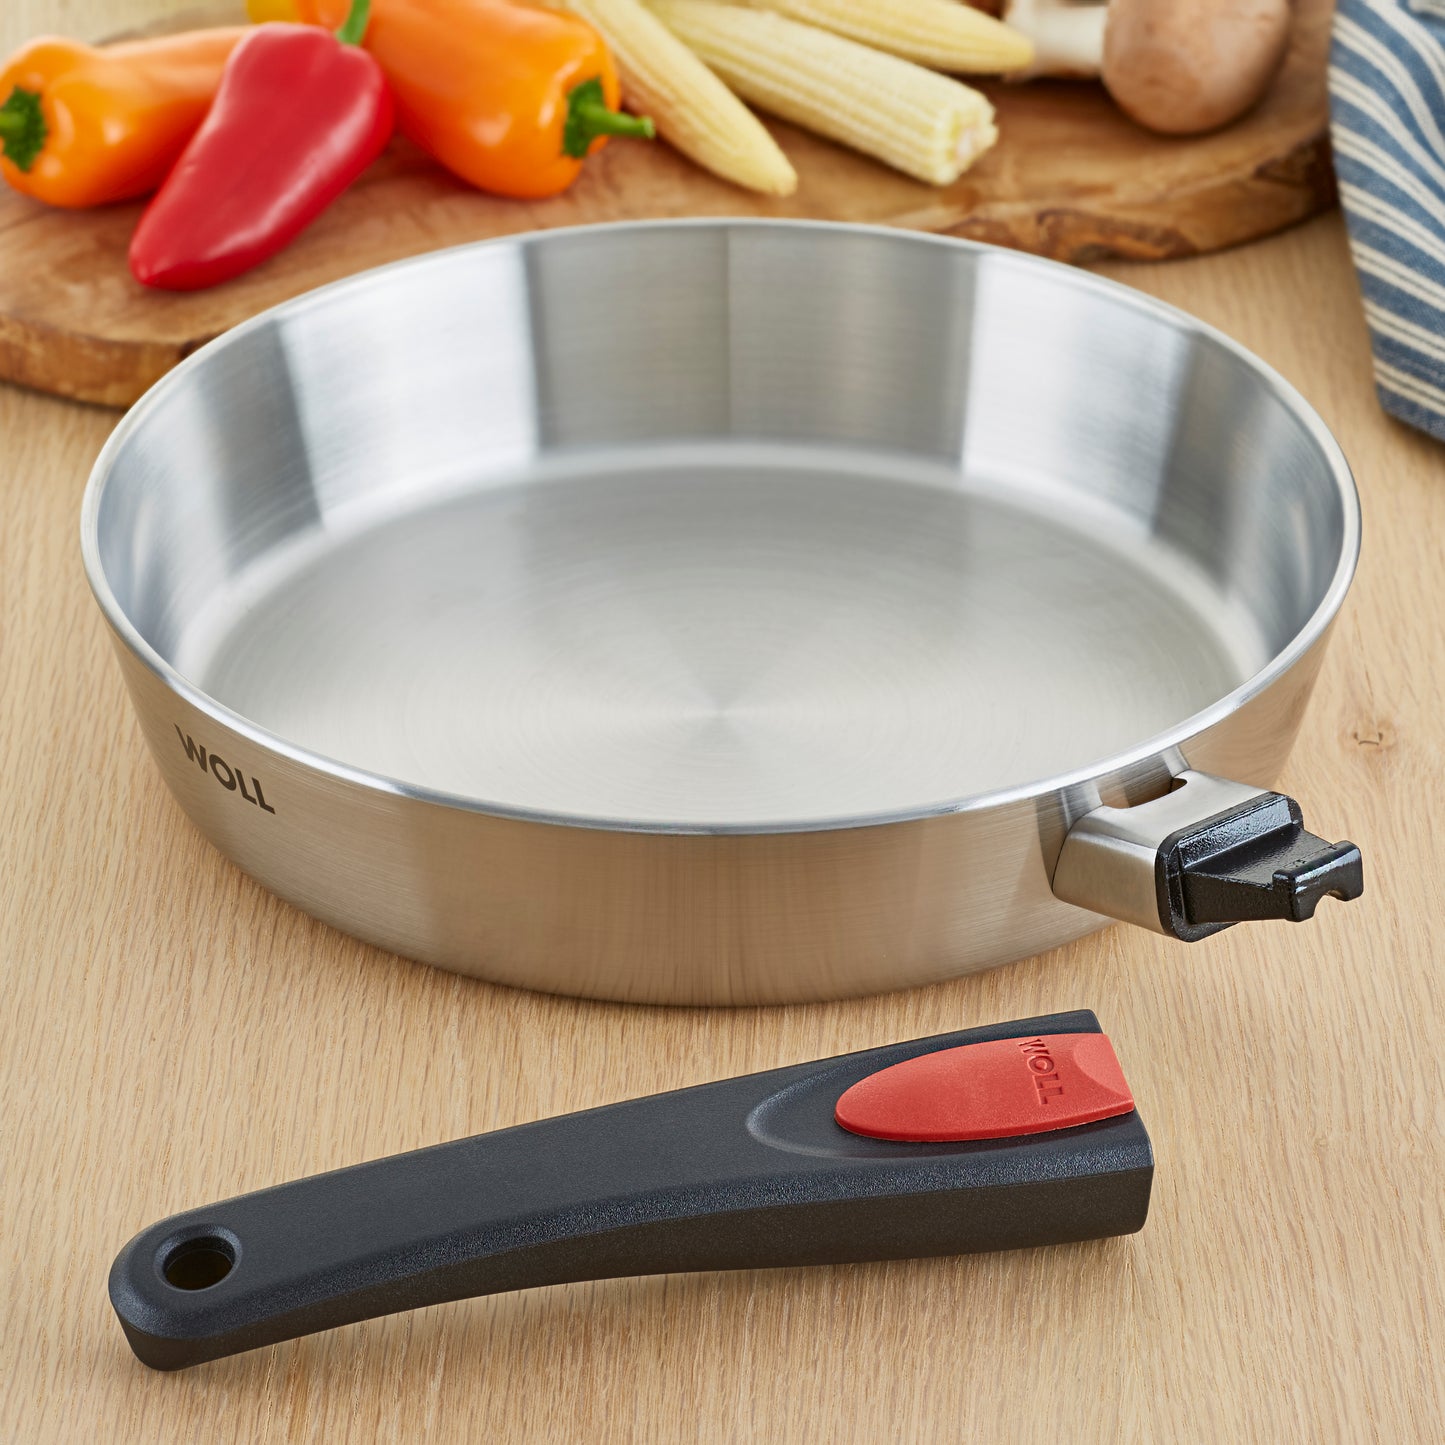 Woll™ Concept Pro Fry Pan